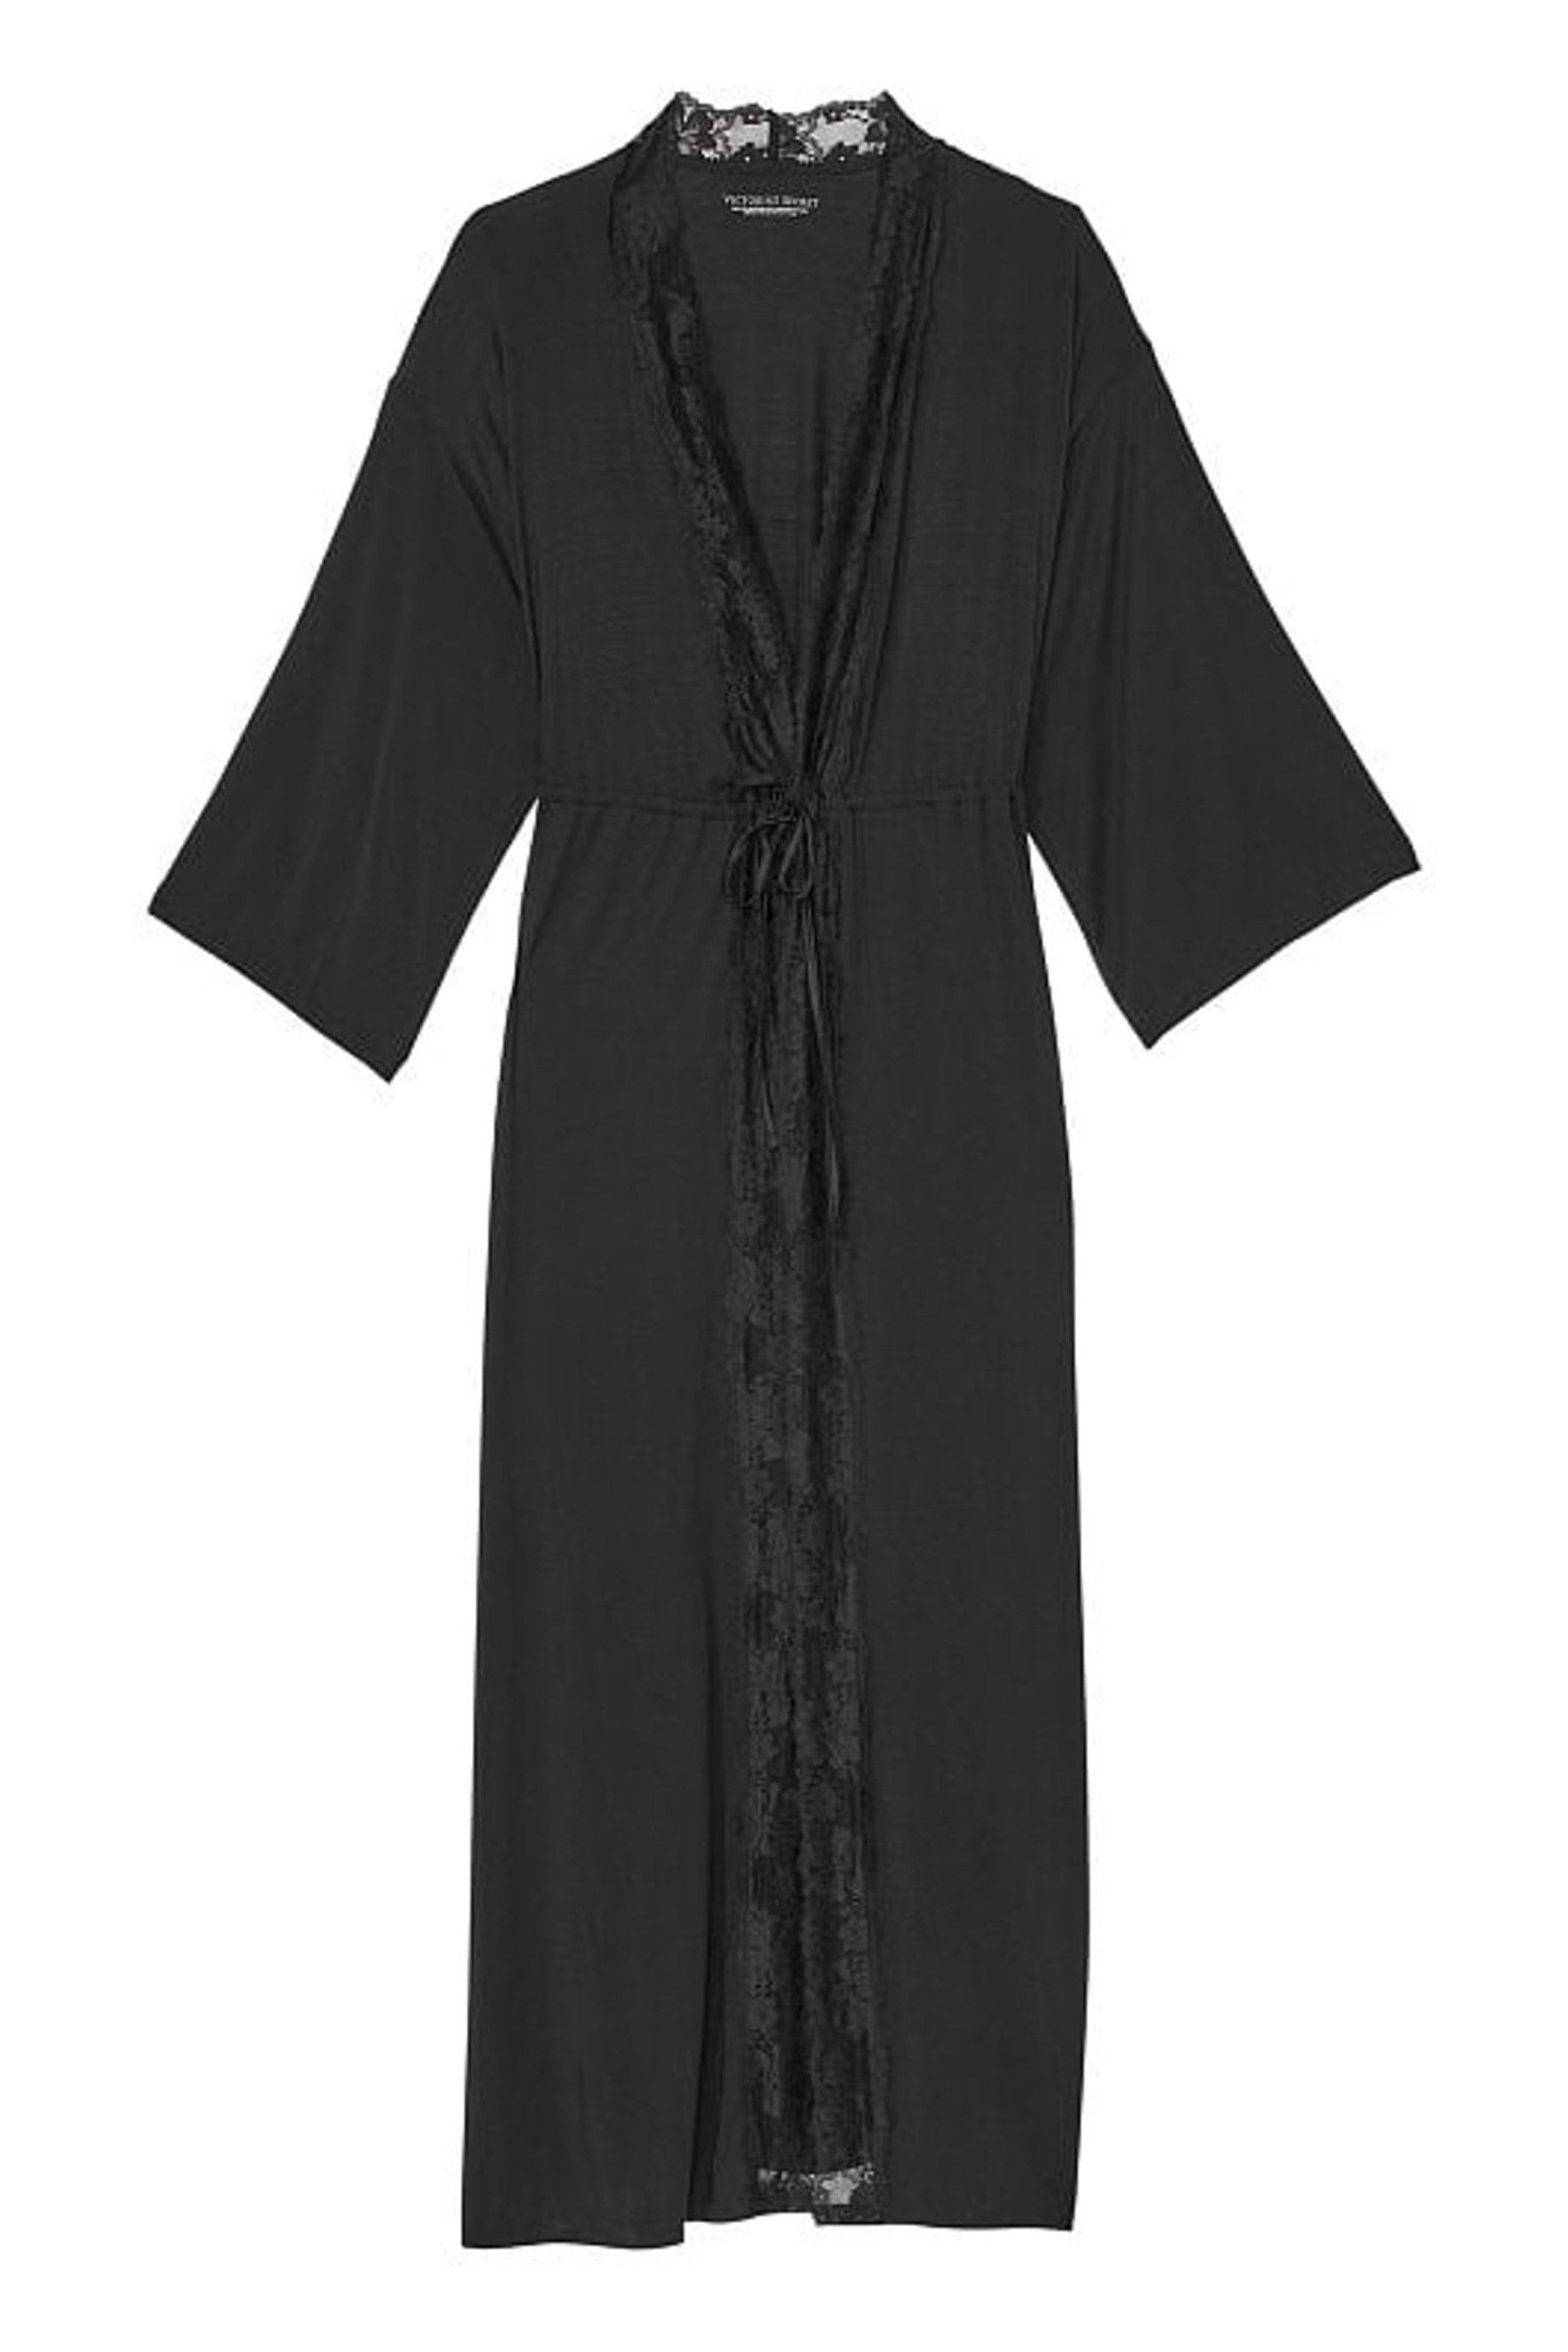 Buy Victoria's Secret Modal High Slit Long Robe from the Victoria's ...